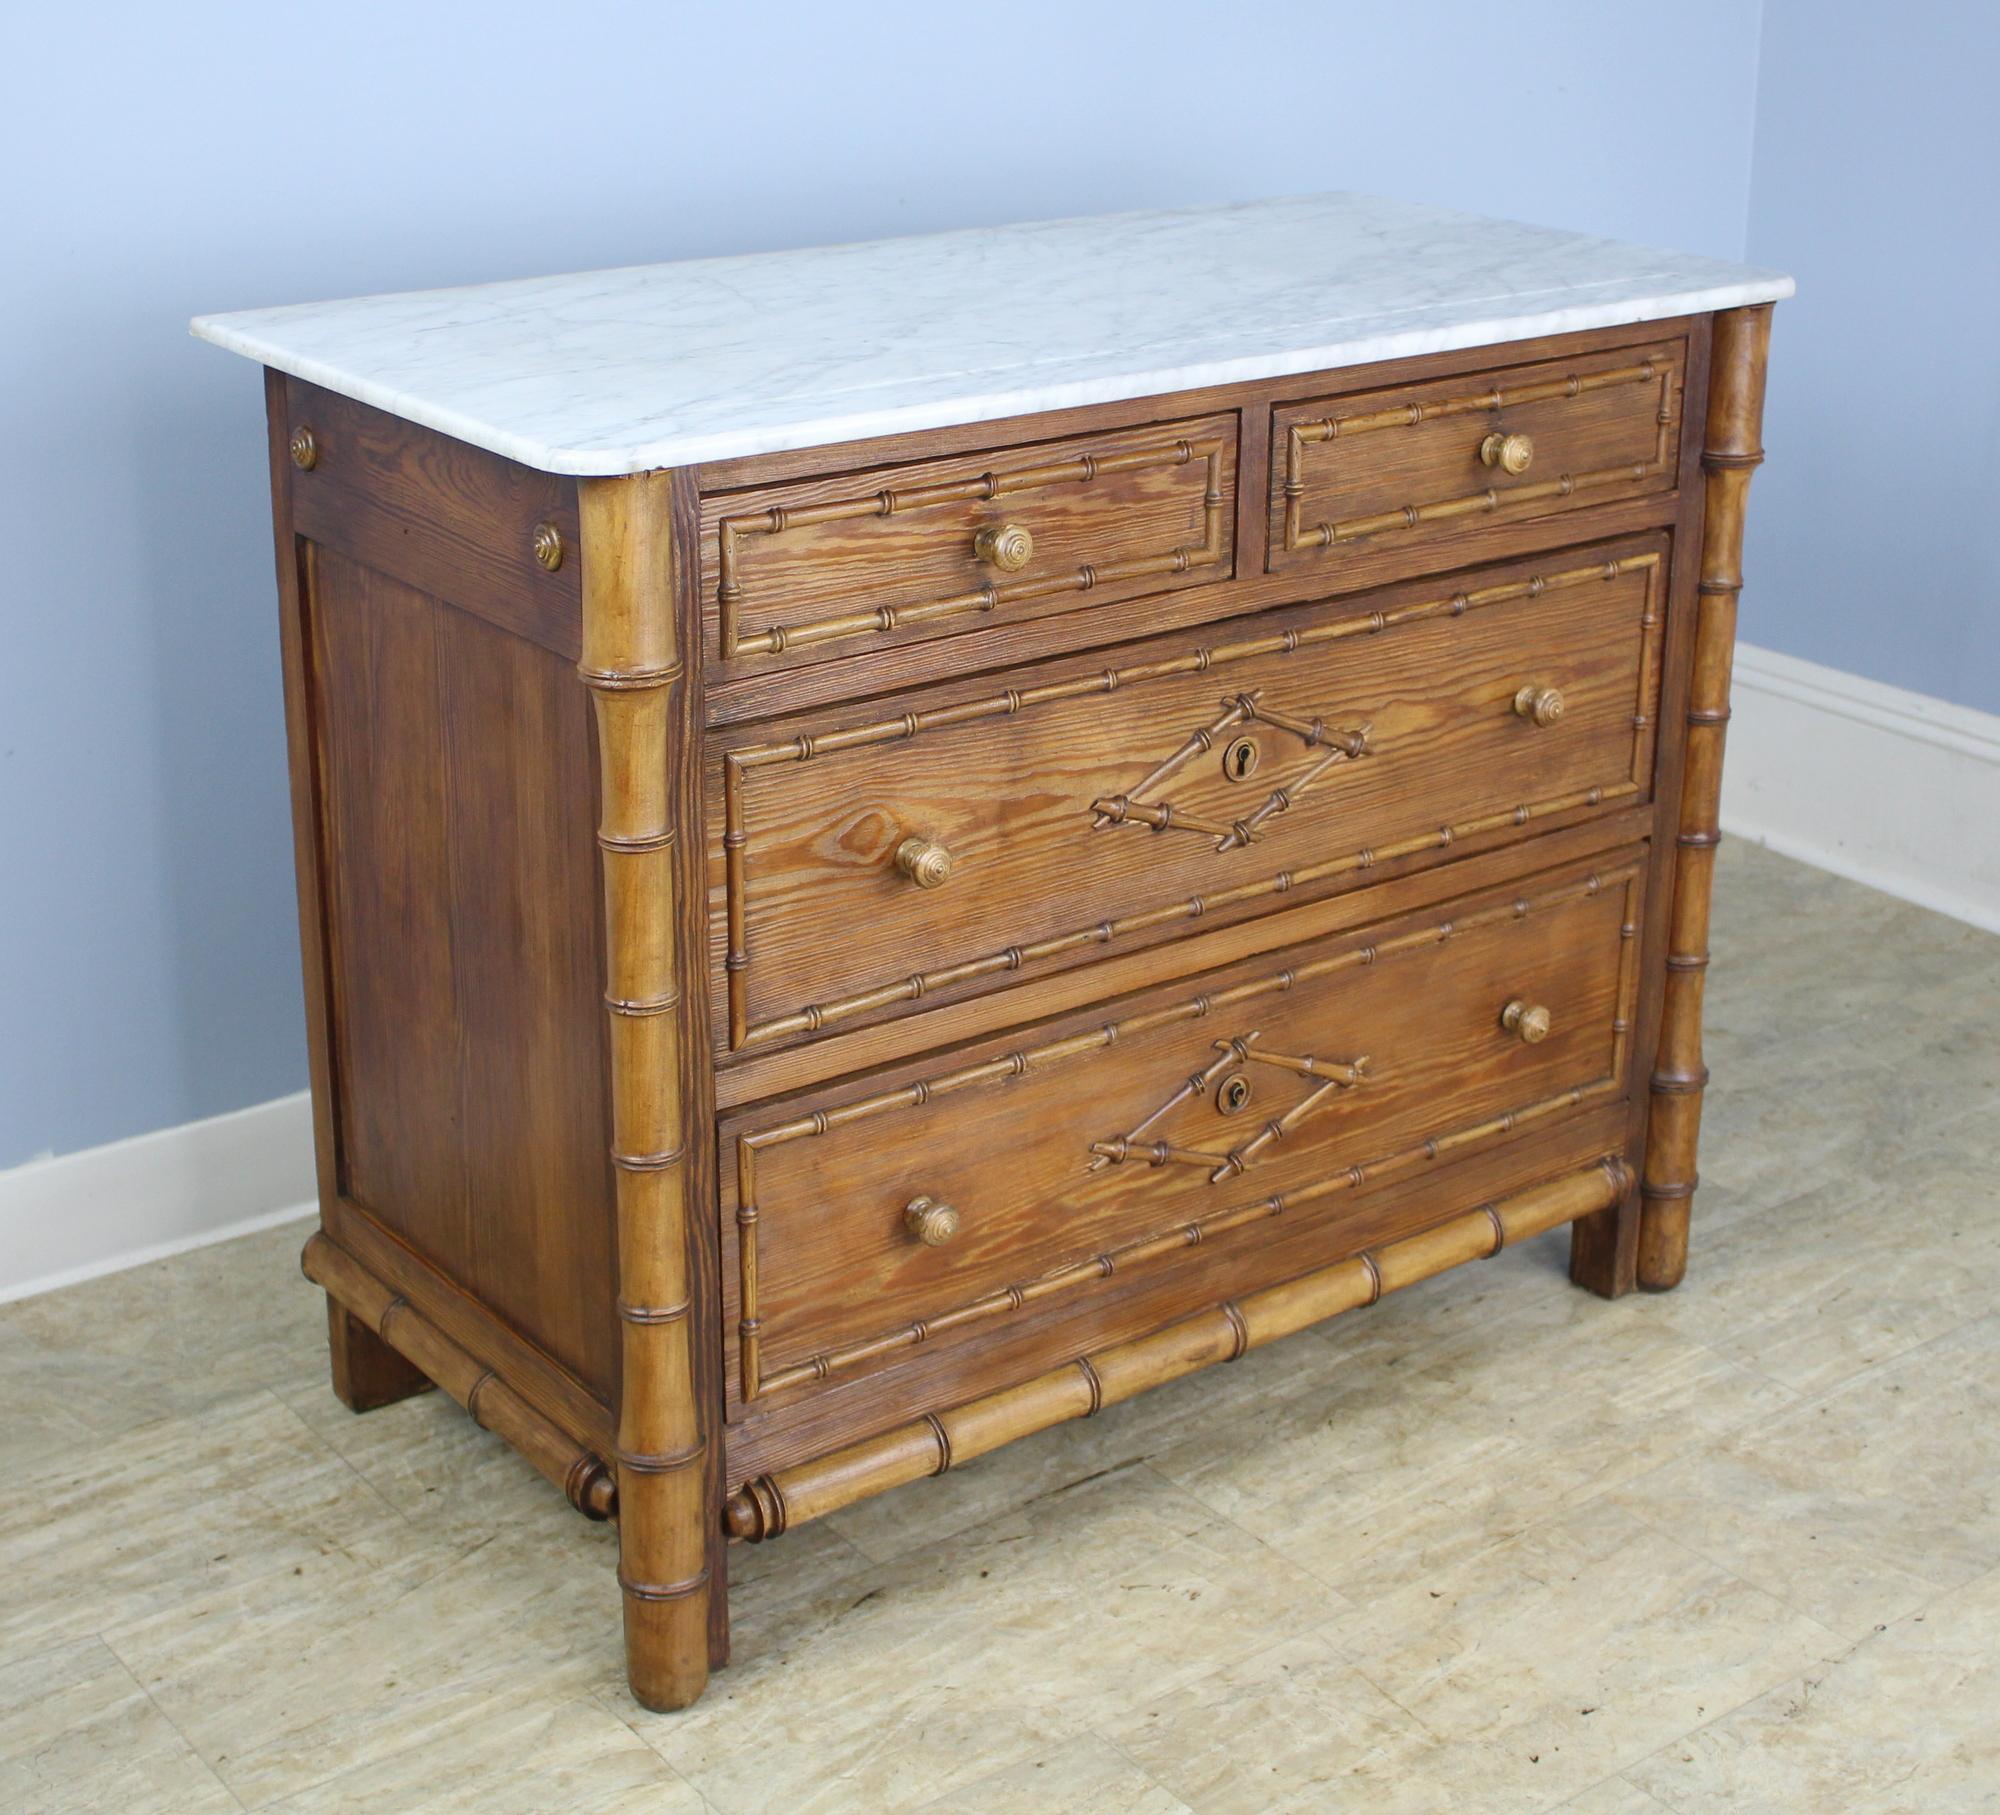 A charming chest of drawers with faux bamboo columns, mouldings and diamond motif drawer decorations. Classic two-over-two construction. The marble, which is original, is in good antique condition.